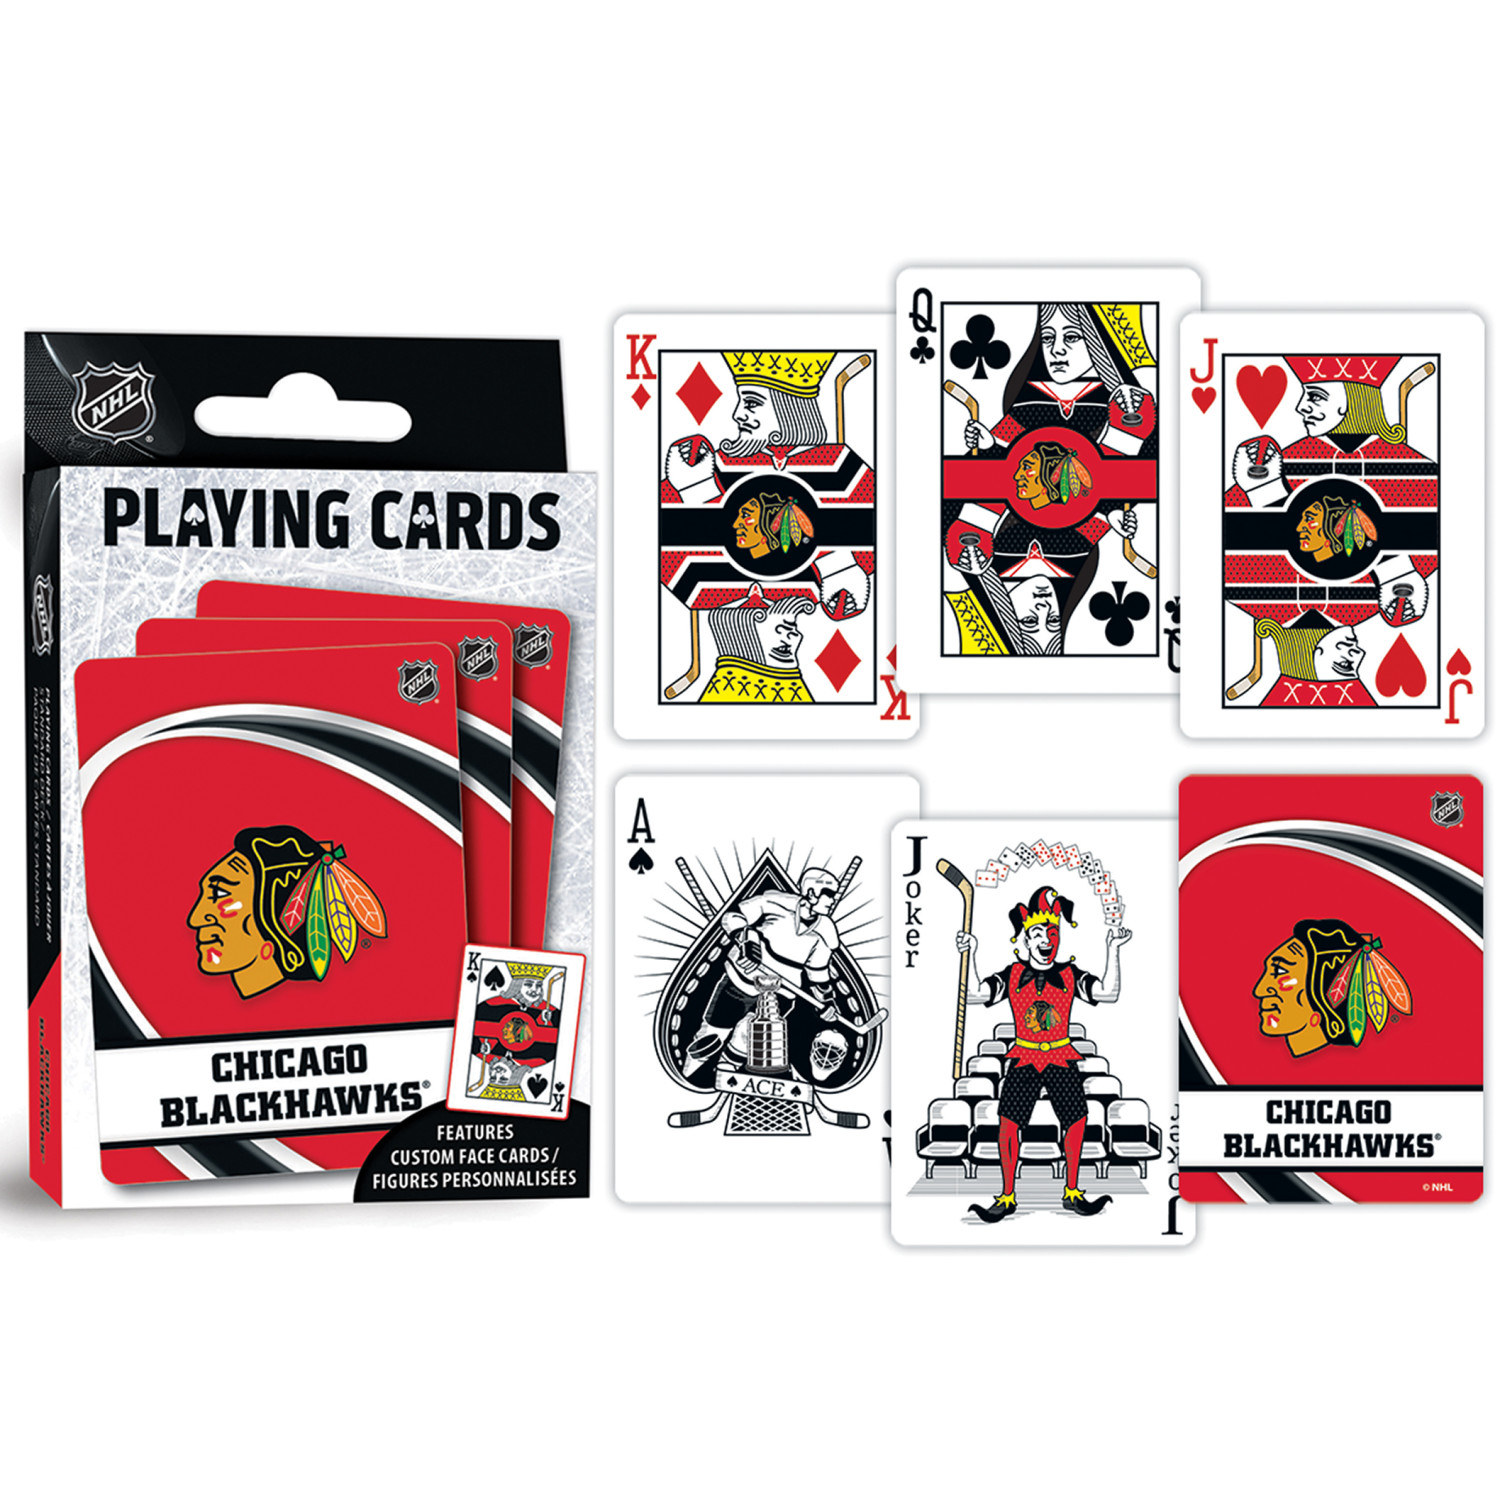 MasterPieces Officially Licensed NHL Chicago Blackhawks Playing Cards - 54 Card Deck for Adults - image 4 of 4